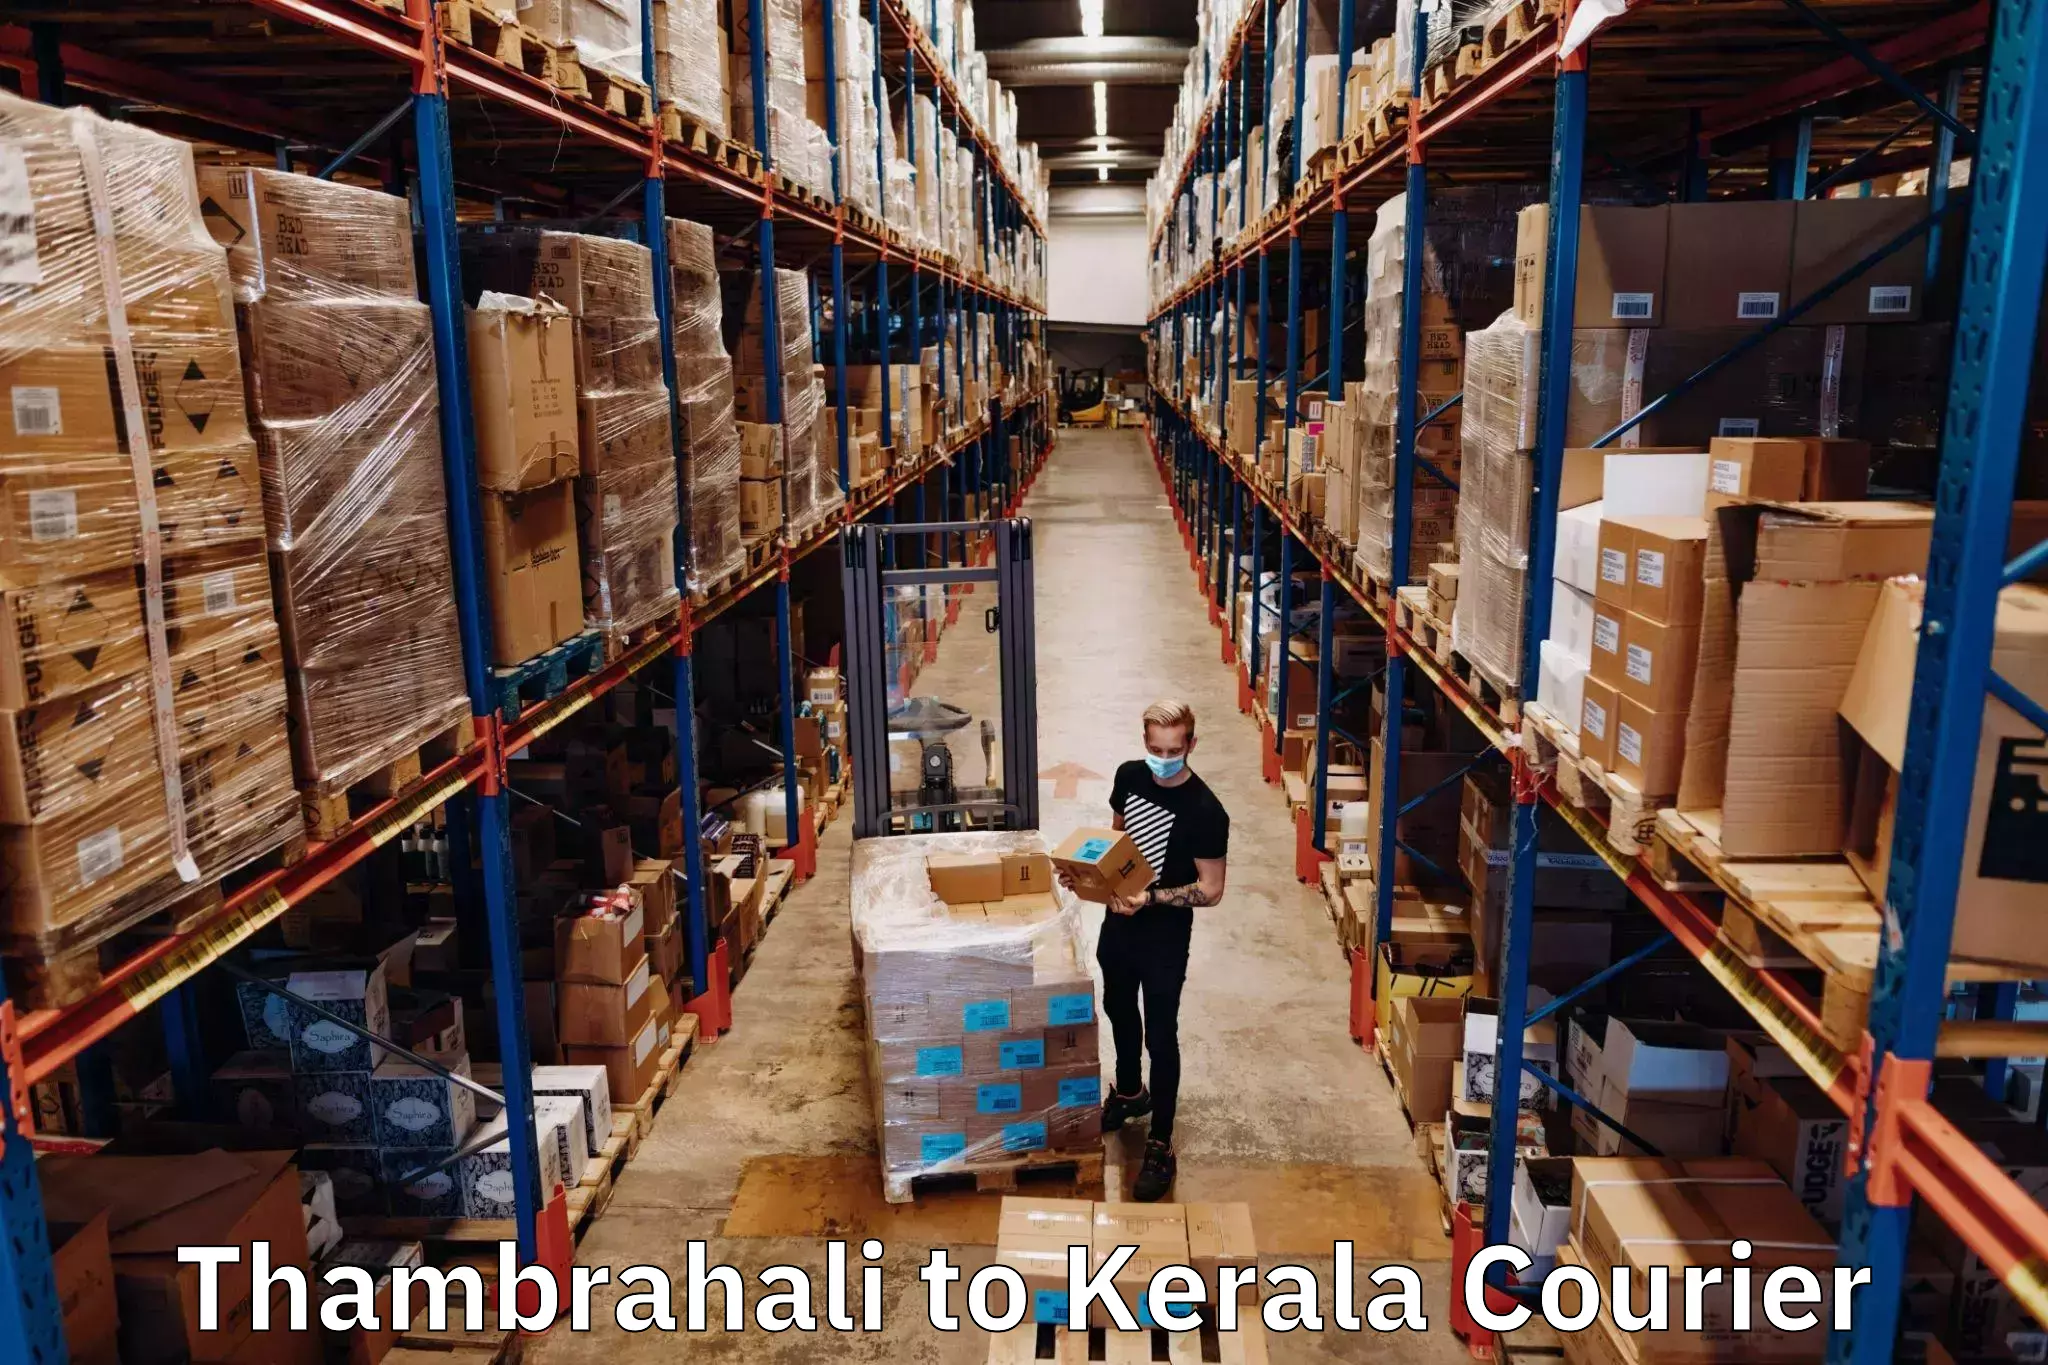 On-call courier service Thambrahali to Kerala